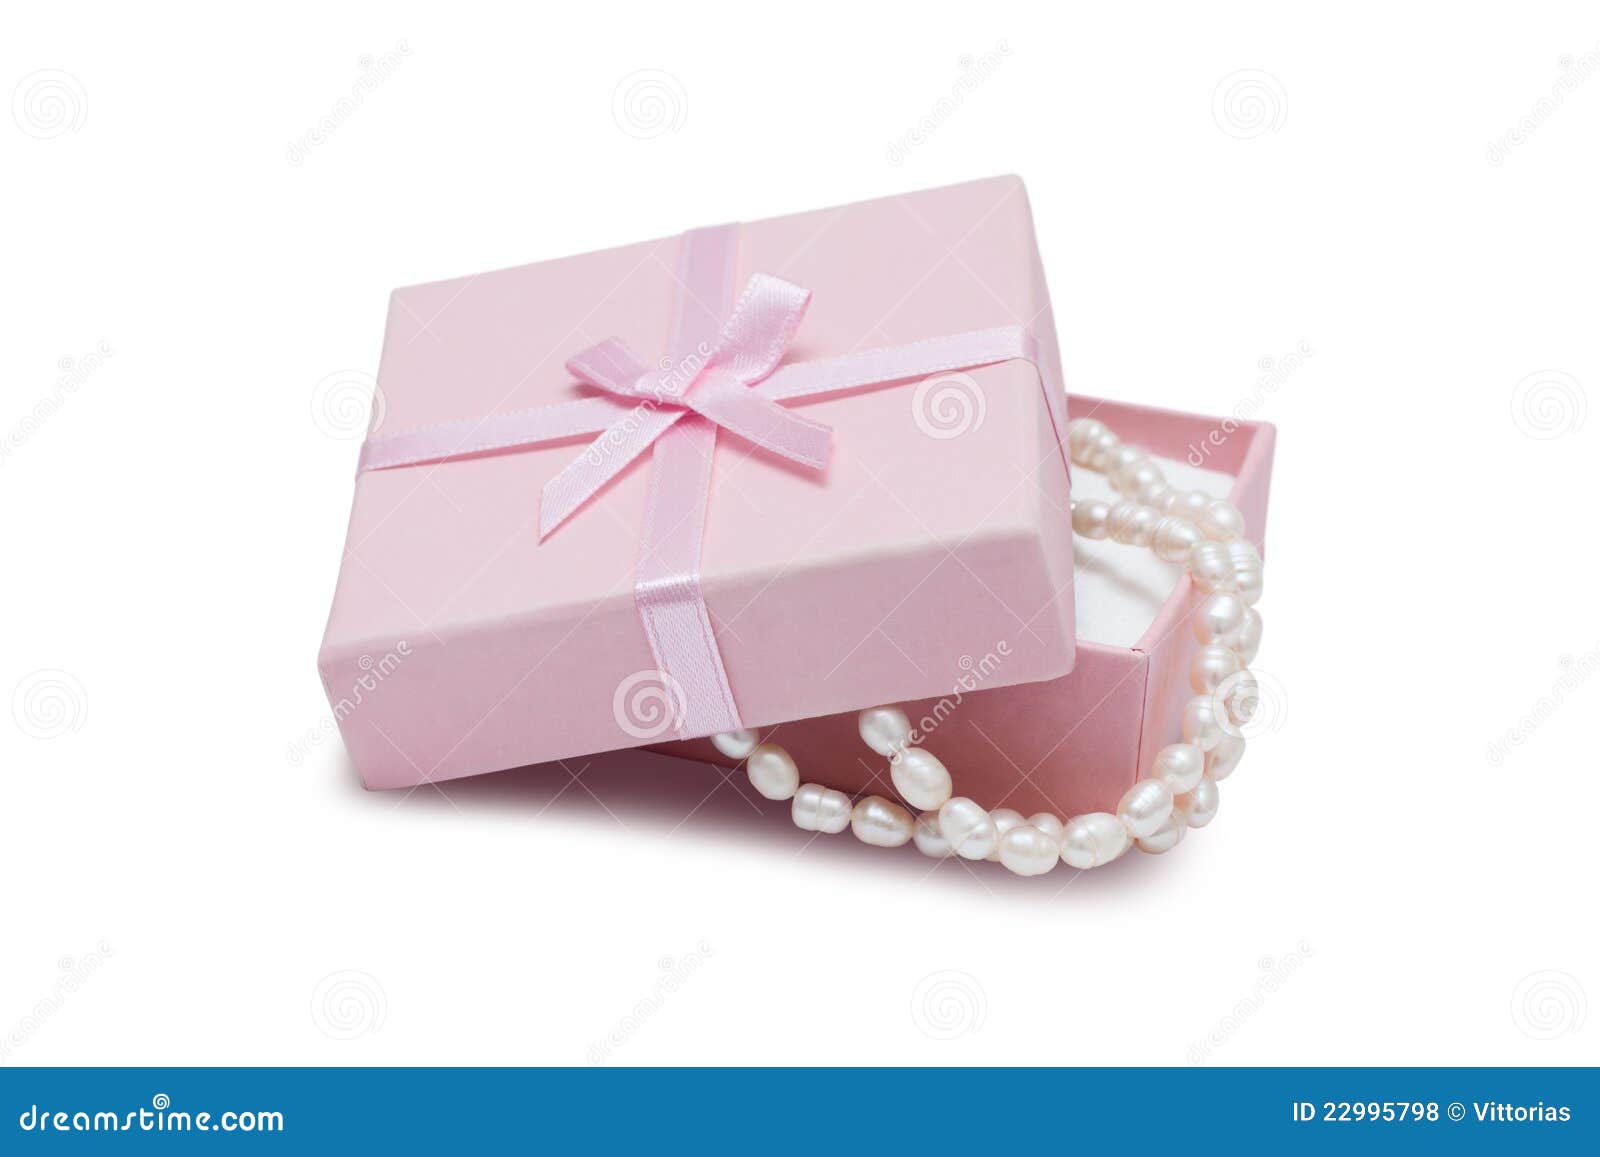 Pearl Necklace Jewelry Box